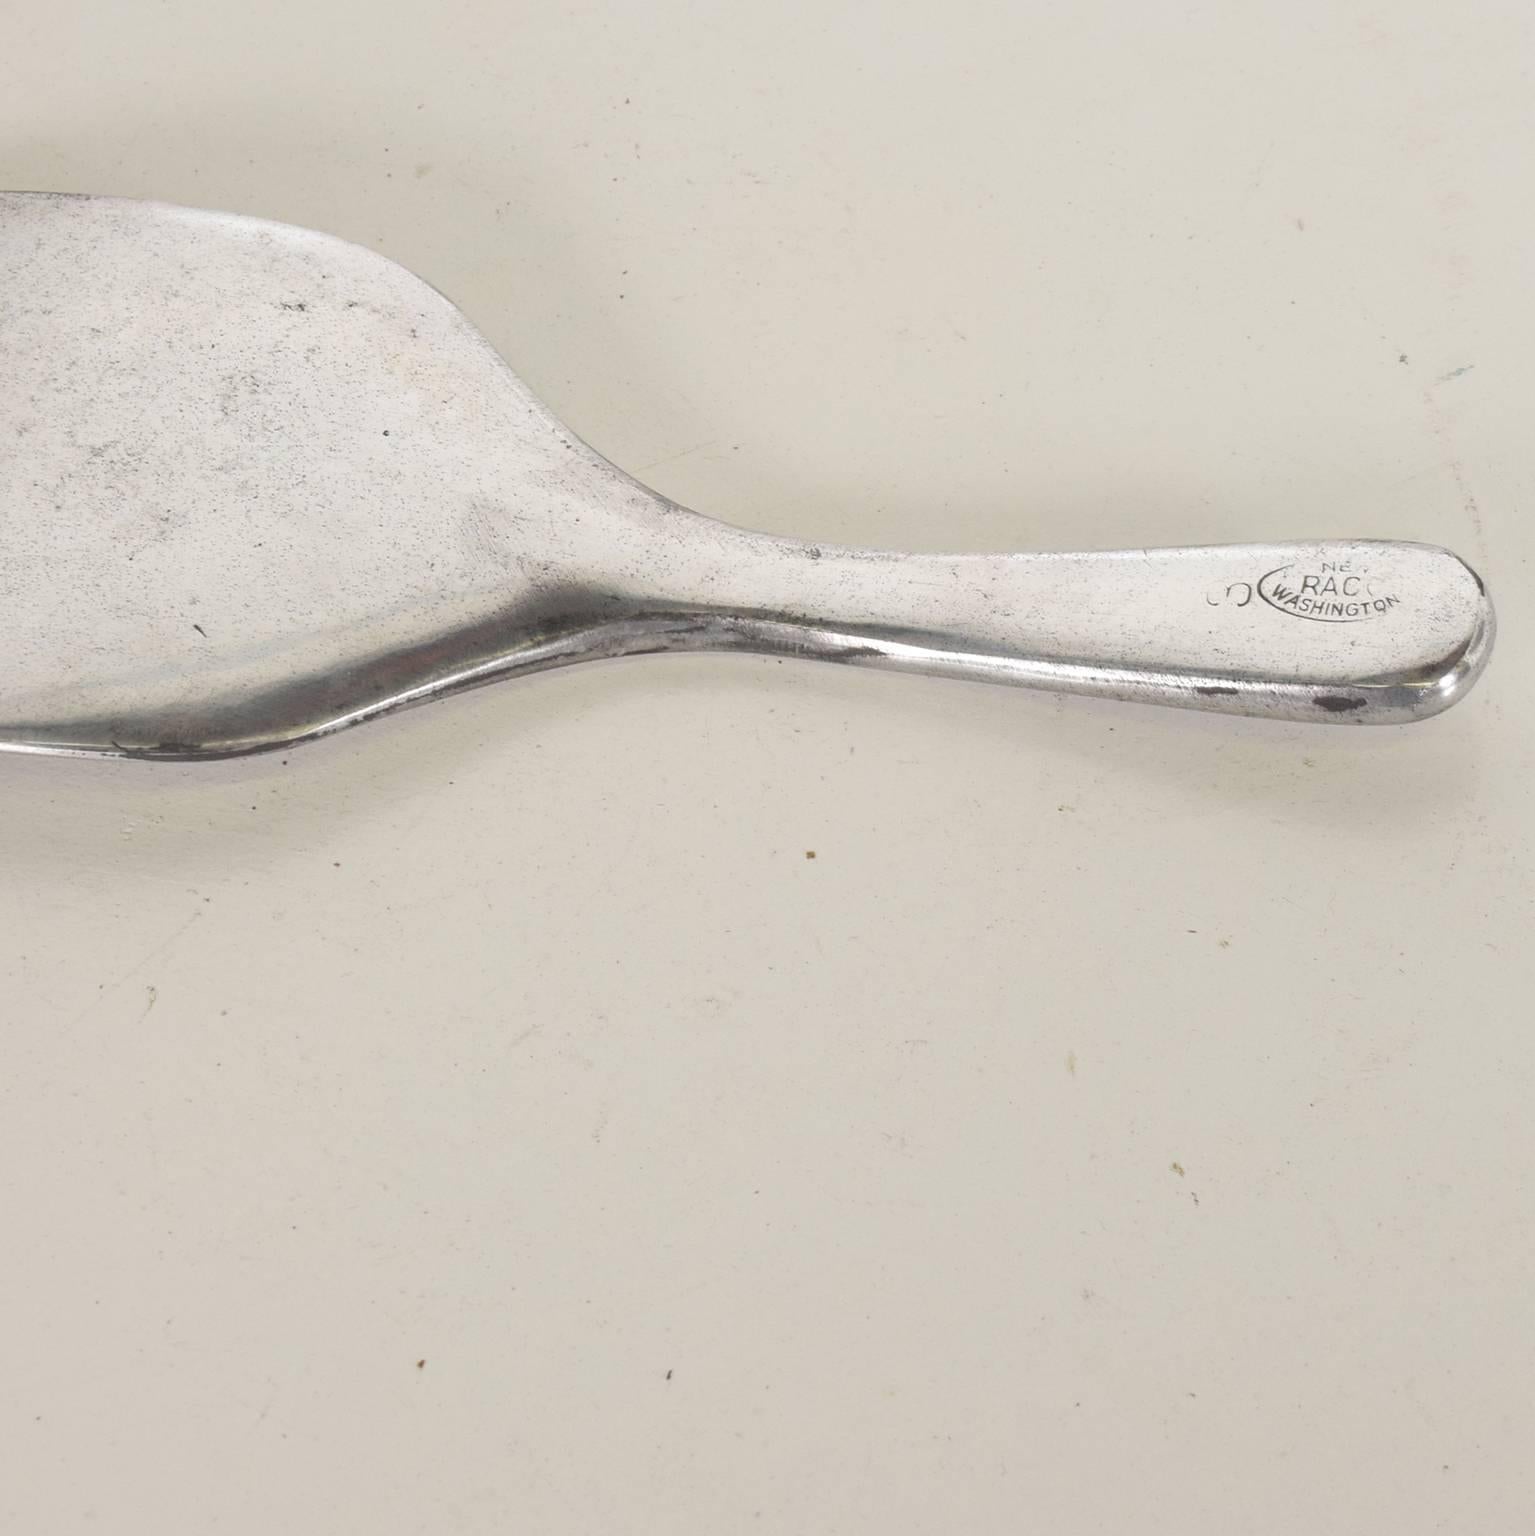 American Vintage Large Spoon Kitchen Tool by New Raco Washington